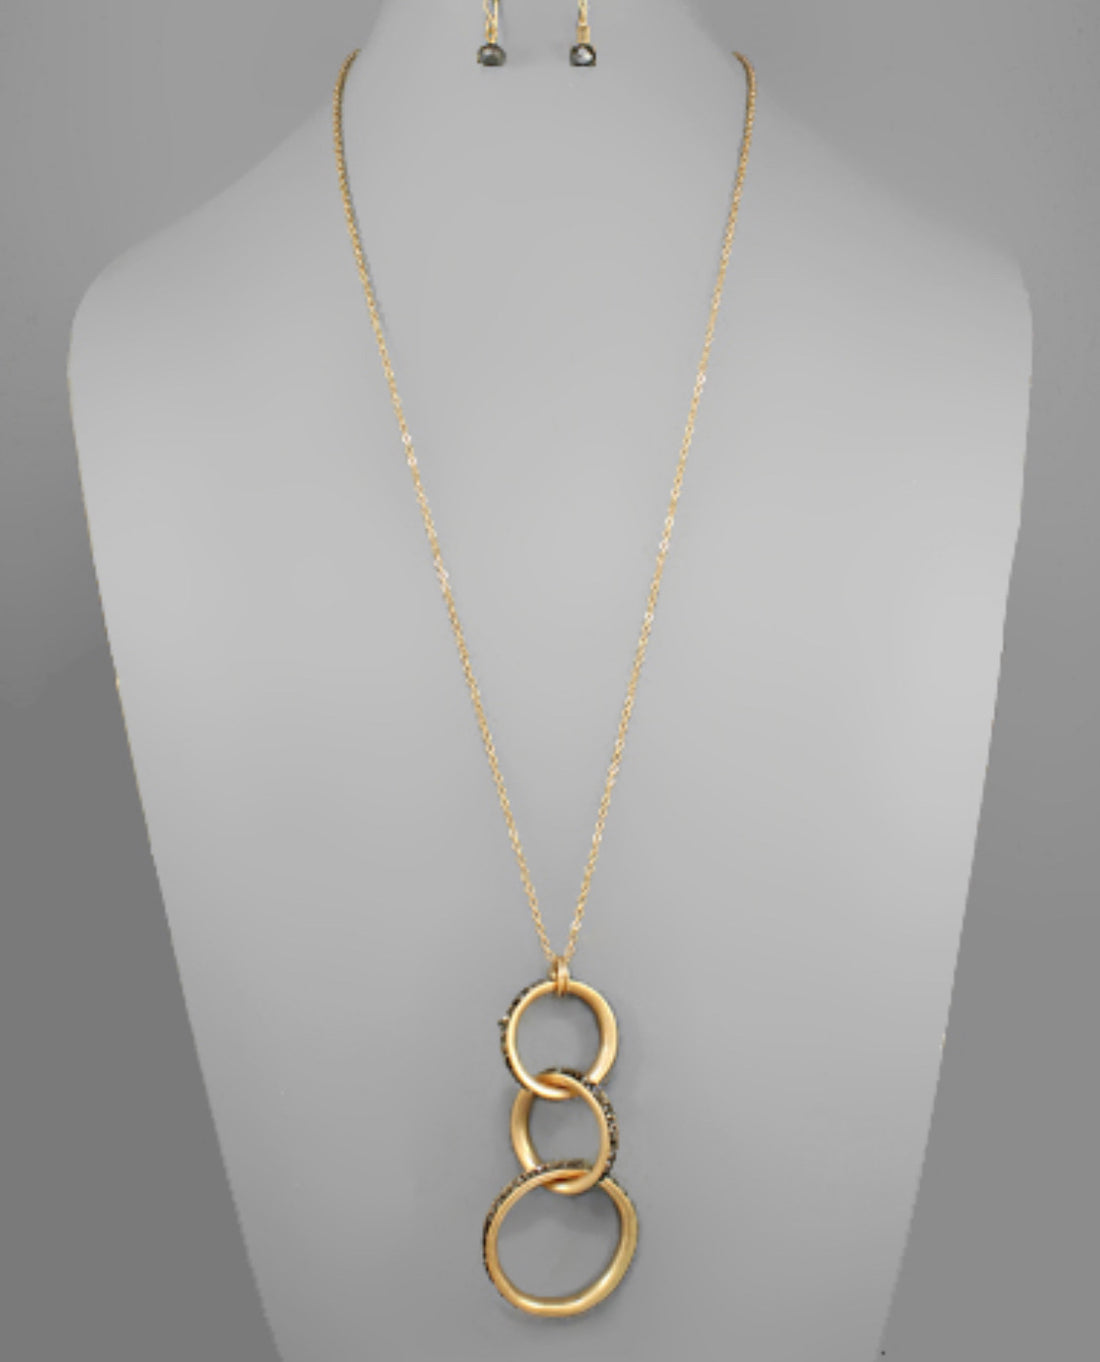 Linked Circle Necklace with Beads - The Sock Dudes